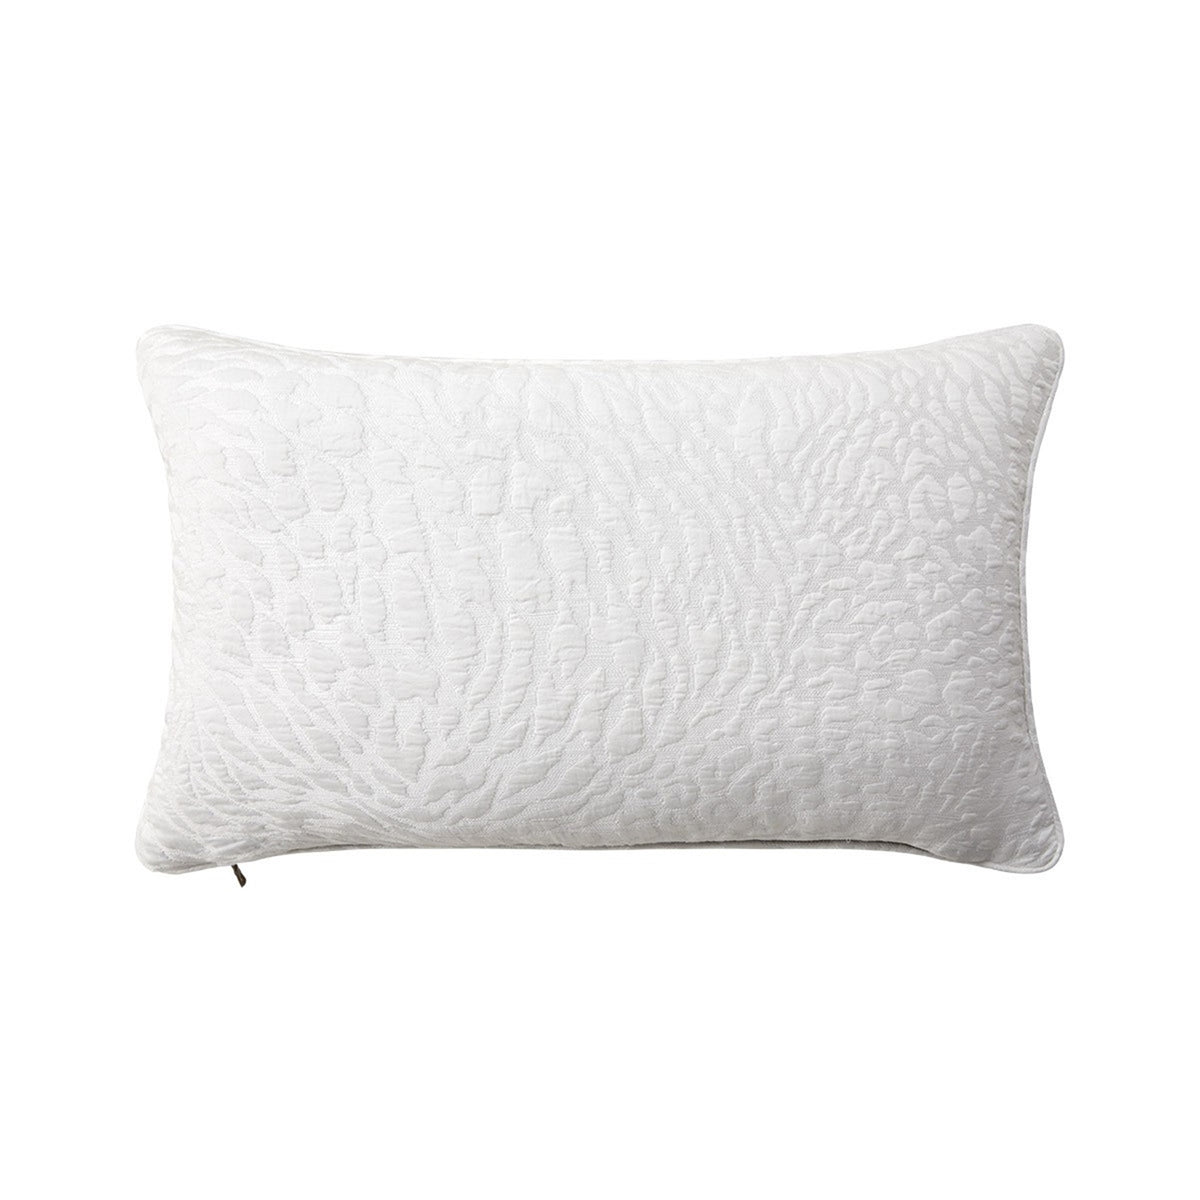 Back View of Yves Delorme Souvenir Decorative Pillow in Blanc Color